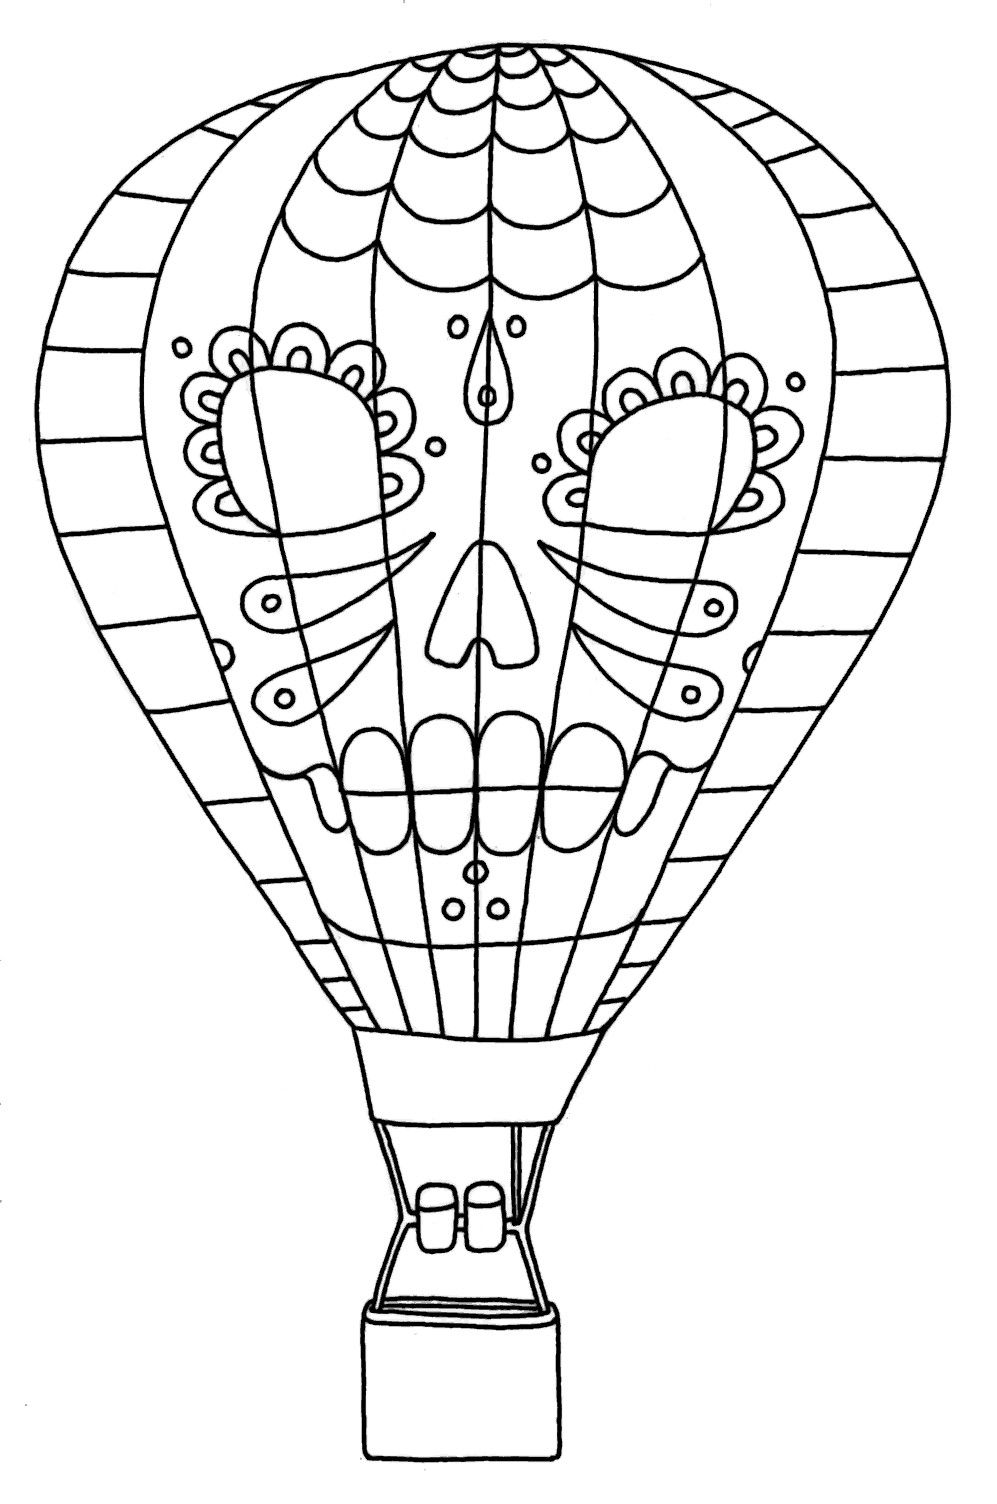 Balloon Coloring Pages Printable
 Yucca Flats N M Wenchkin s Coloring Pages Dia de los